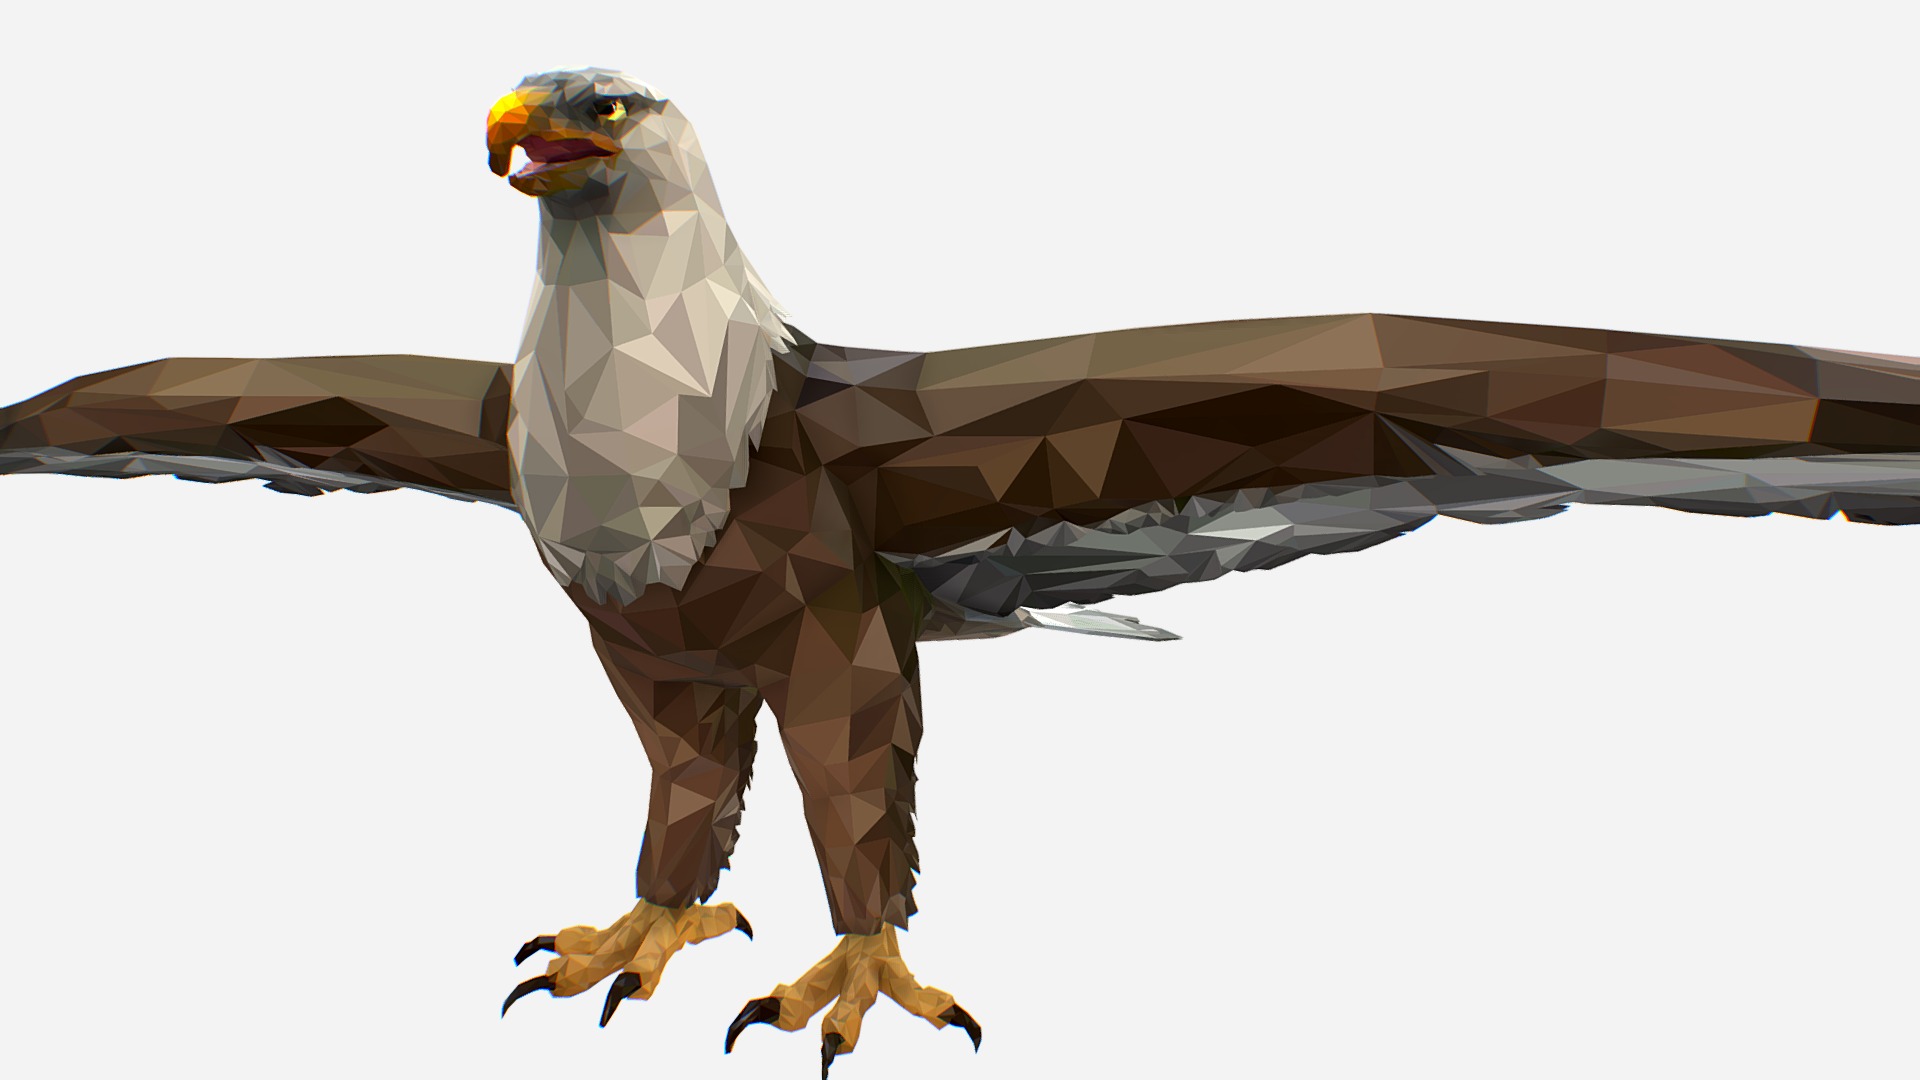 3D model low poly art  Bald Eagle Bird - This is a 3D model of the low poly art  Bald Eagle Bird. The 3D model is about a bird with a long tail.